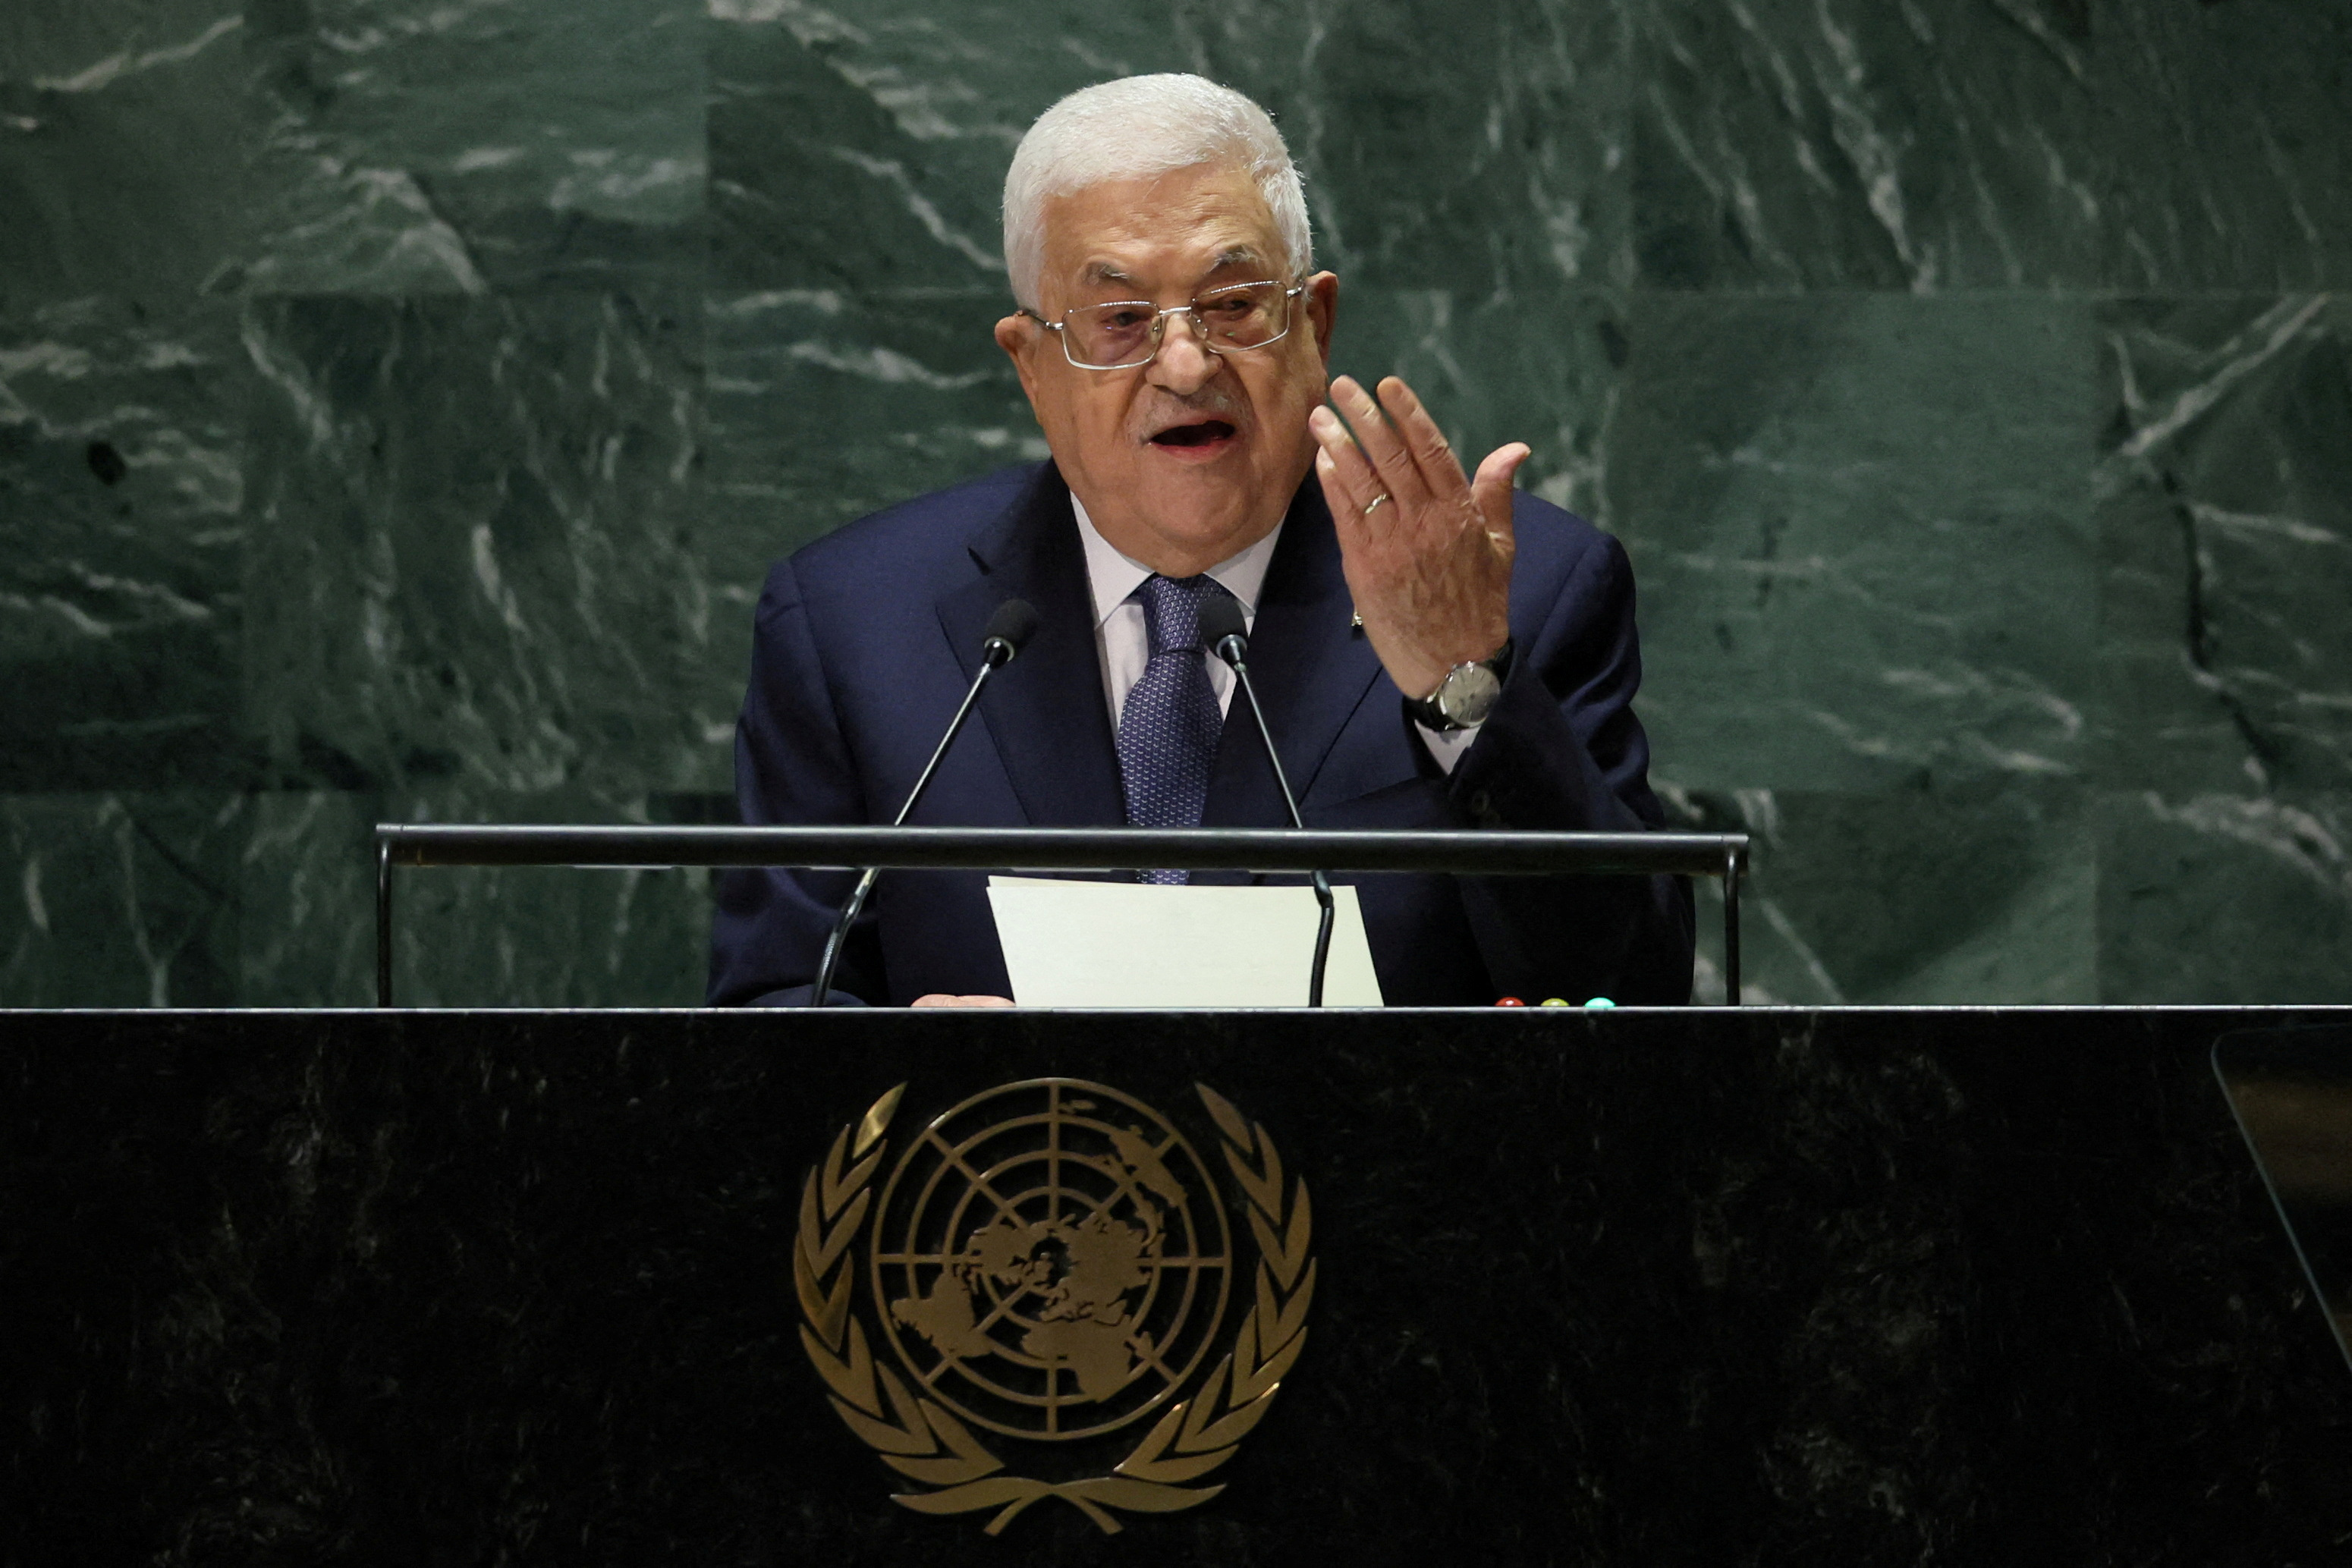 Palestinian President Mahmoud Abbas addresses the 78th Session of the UN General Assembly in New York City on September 21, 2023.